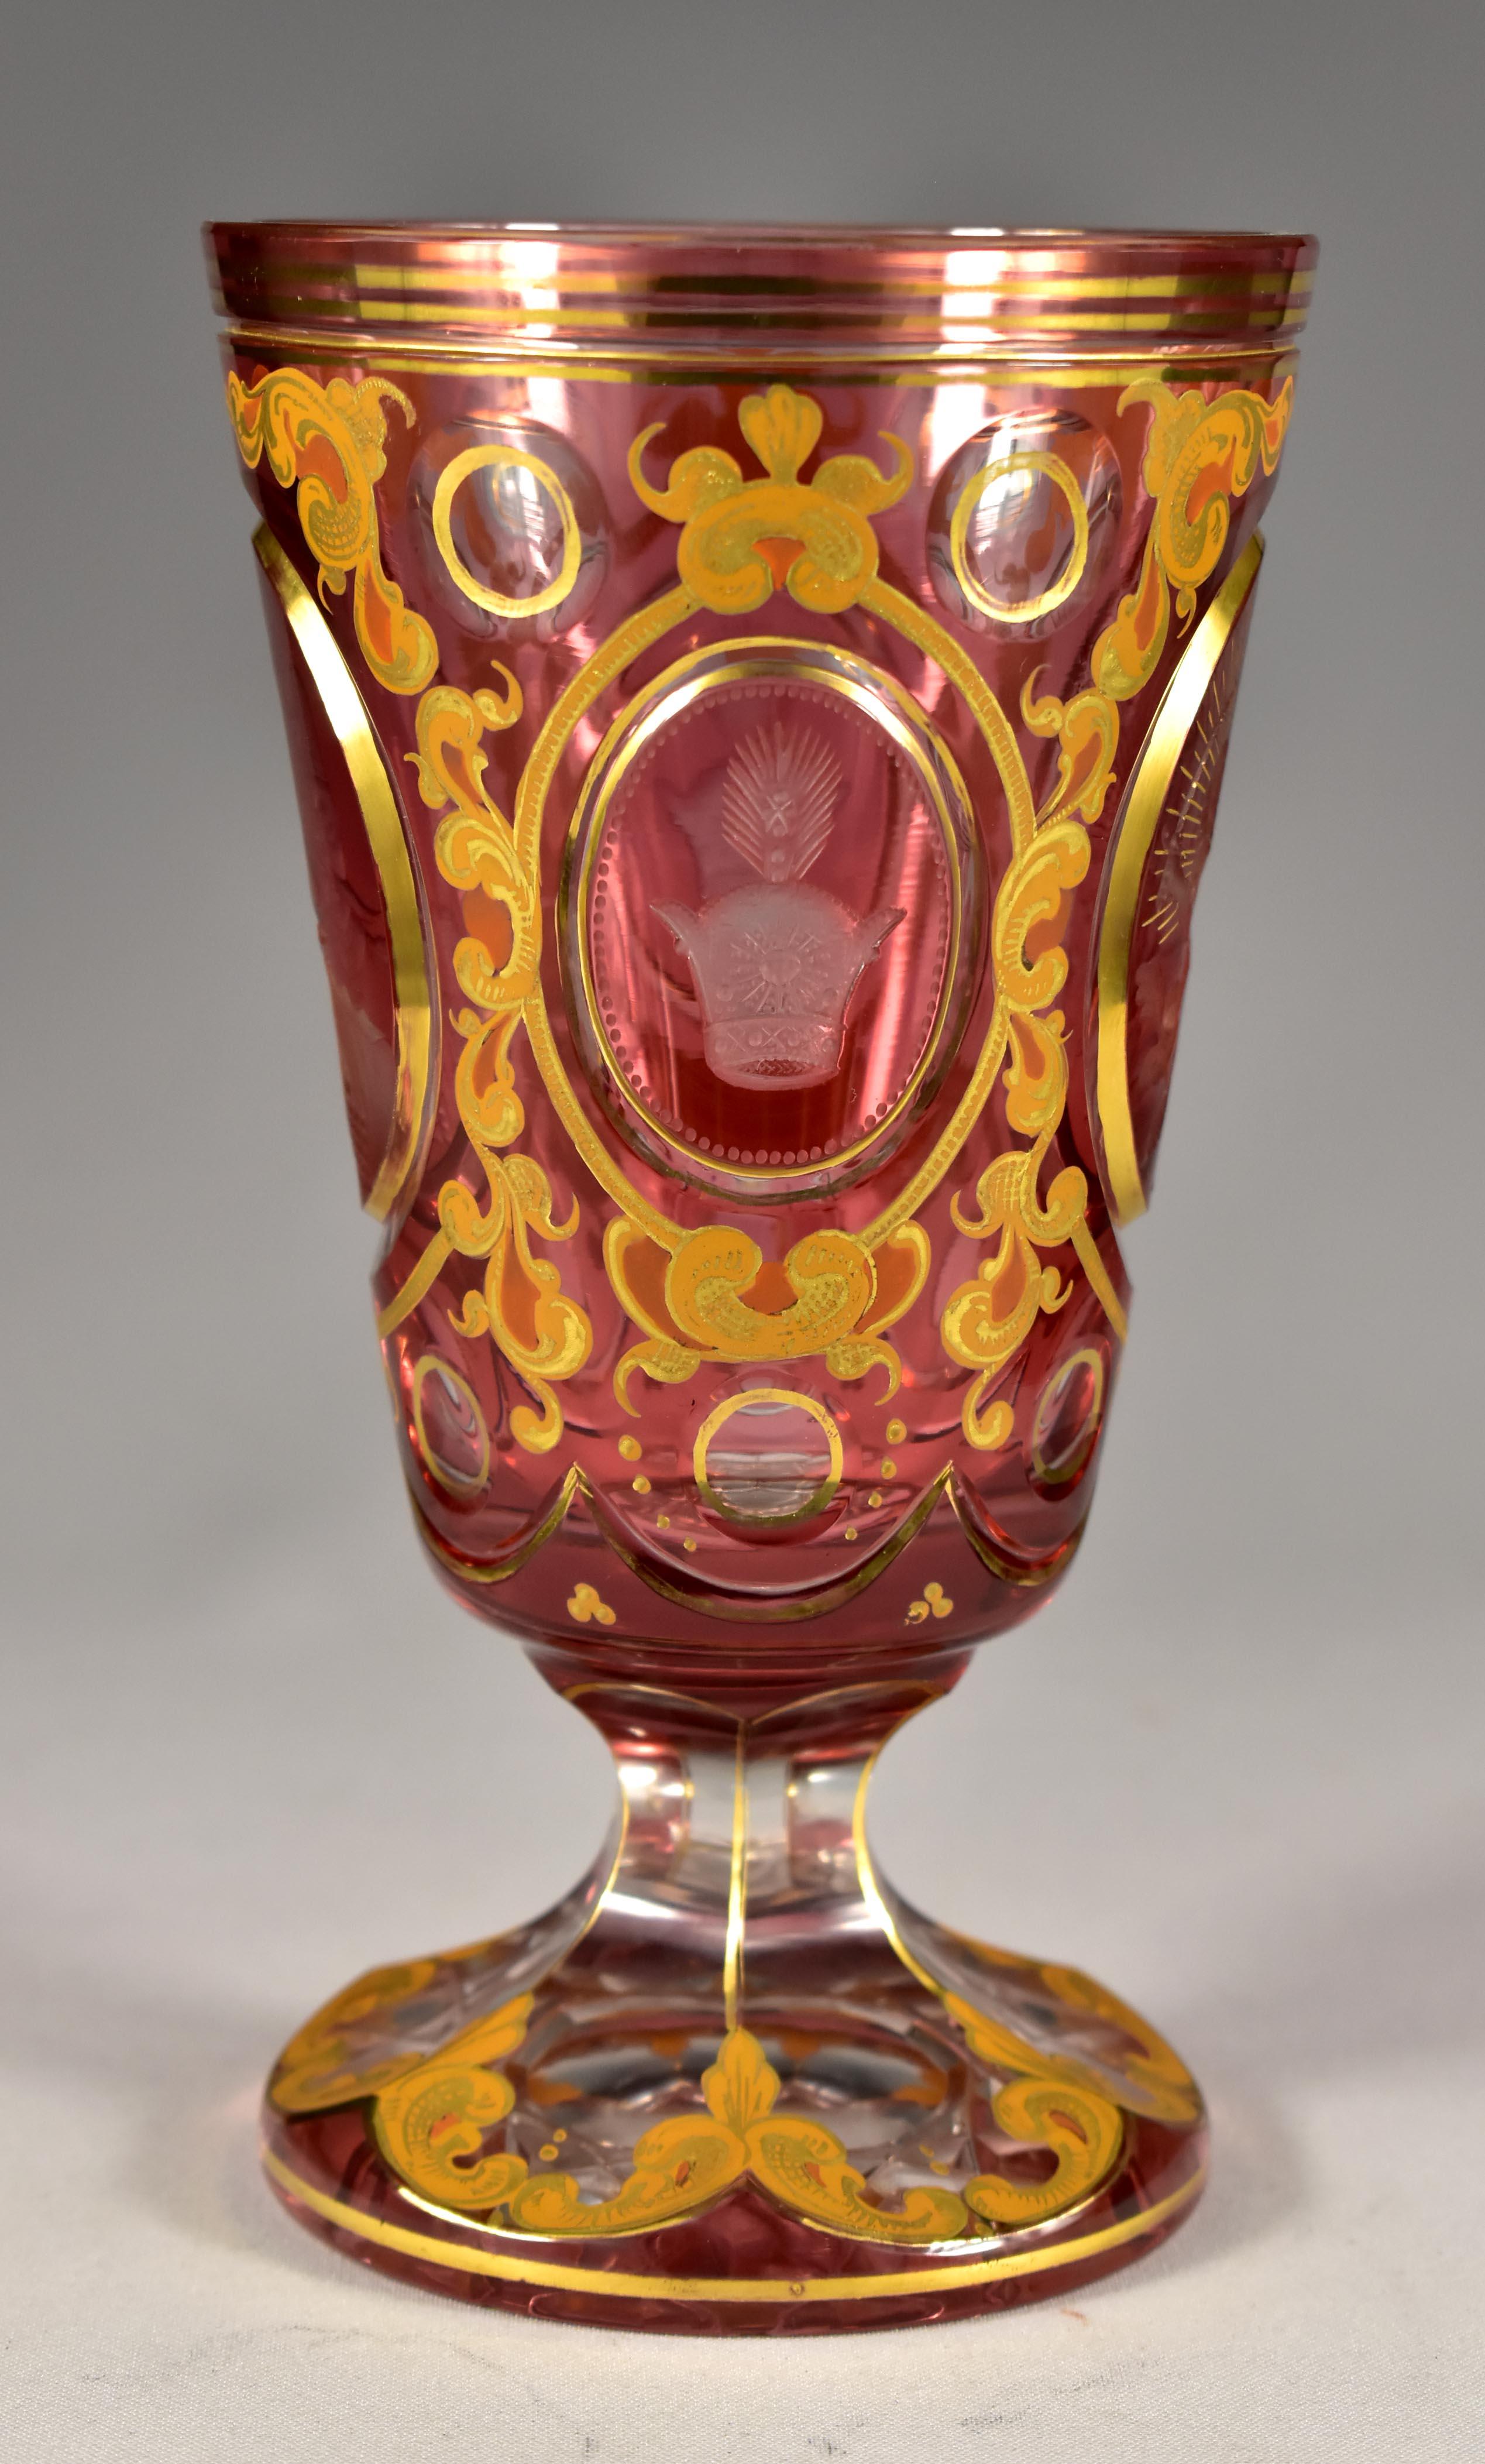 Overlay glass ruby goblet, cut, engraved and painted.It is probably the work of Bohemian glass masters from the first half of the 20th century. It is a portrait of the Shah - Mozaffar ad-Din Shah Qajar, probably made for some anniversary or a